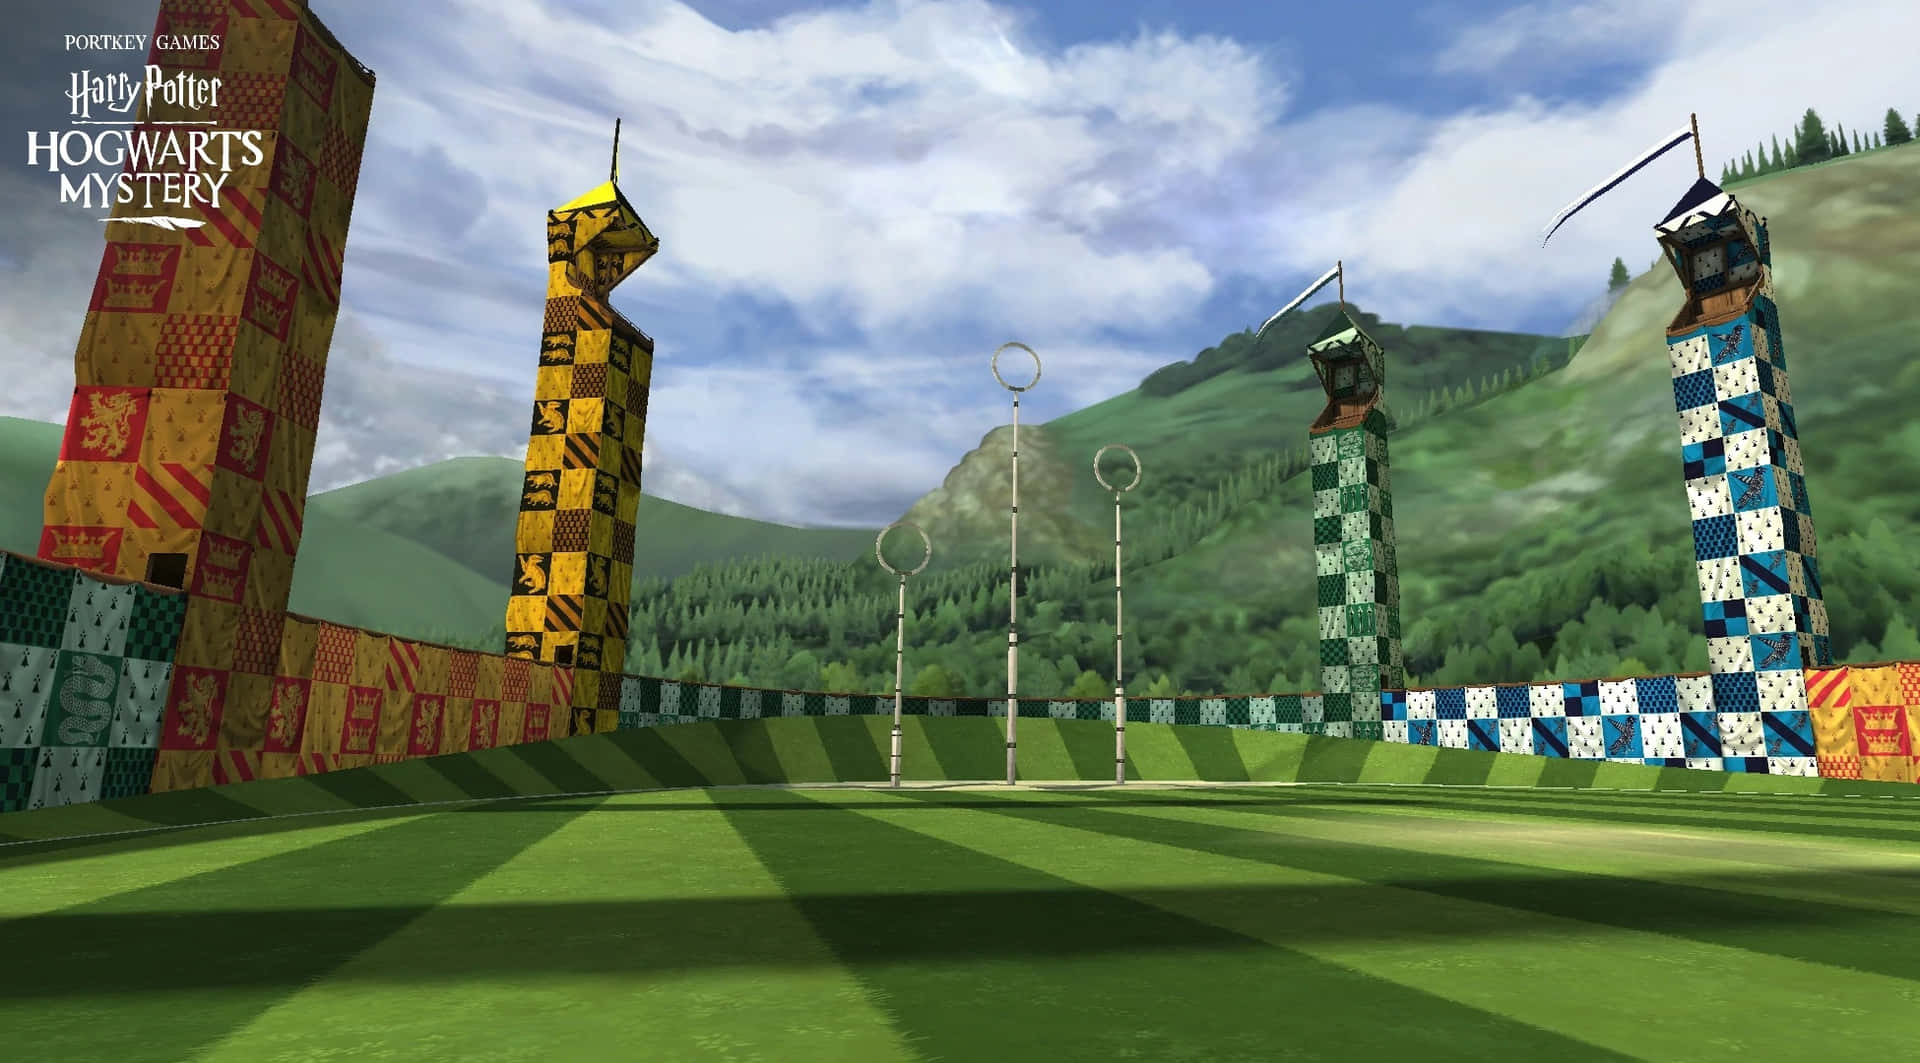 Image  The Hogwarts Quidditch Pitch Wallpaper